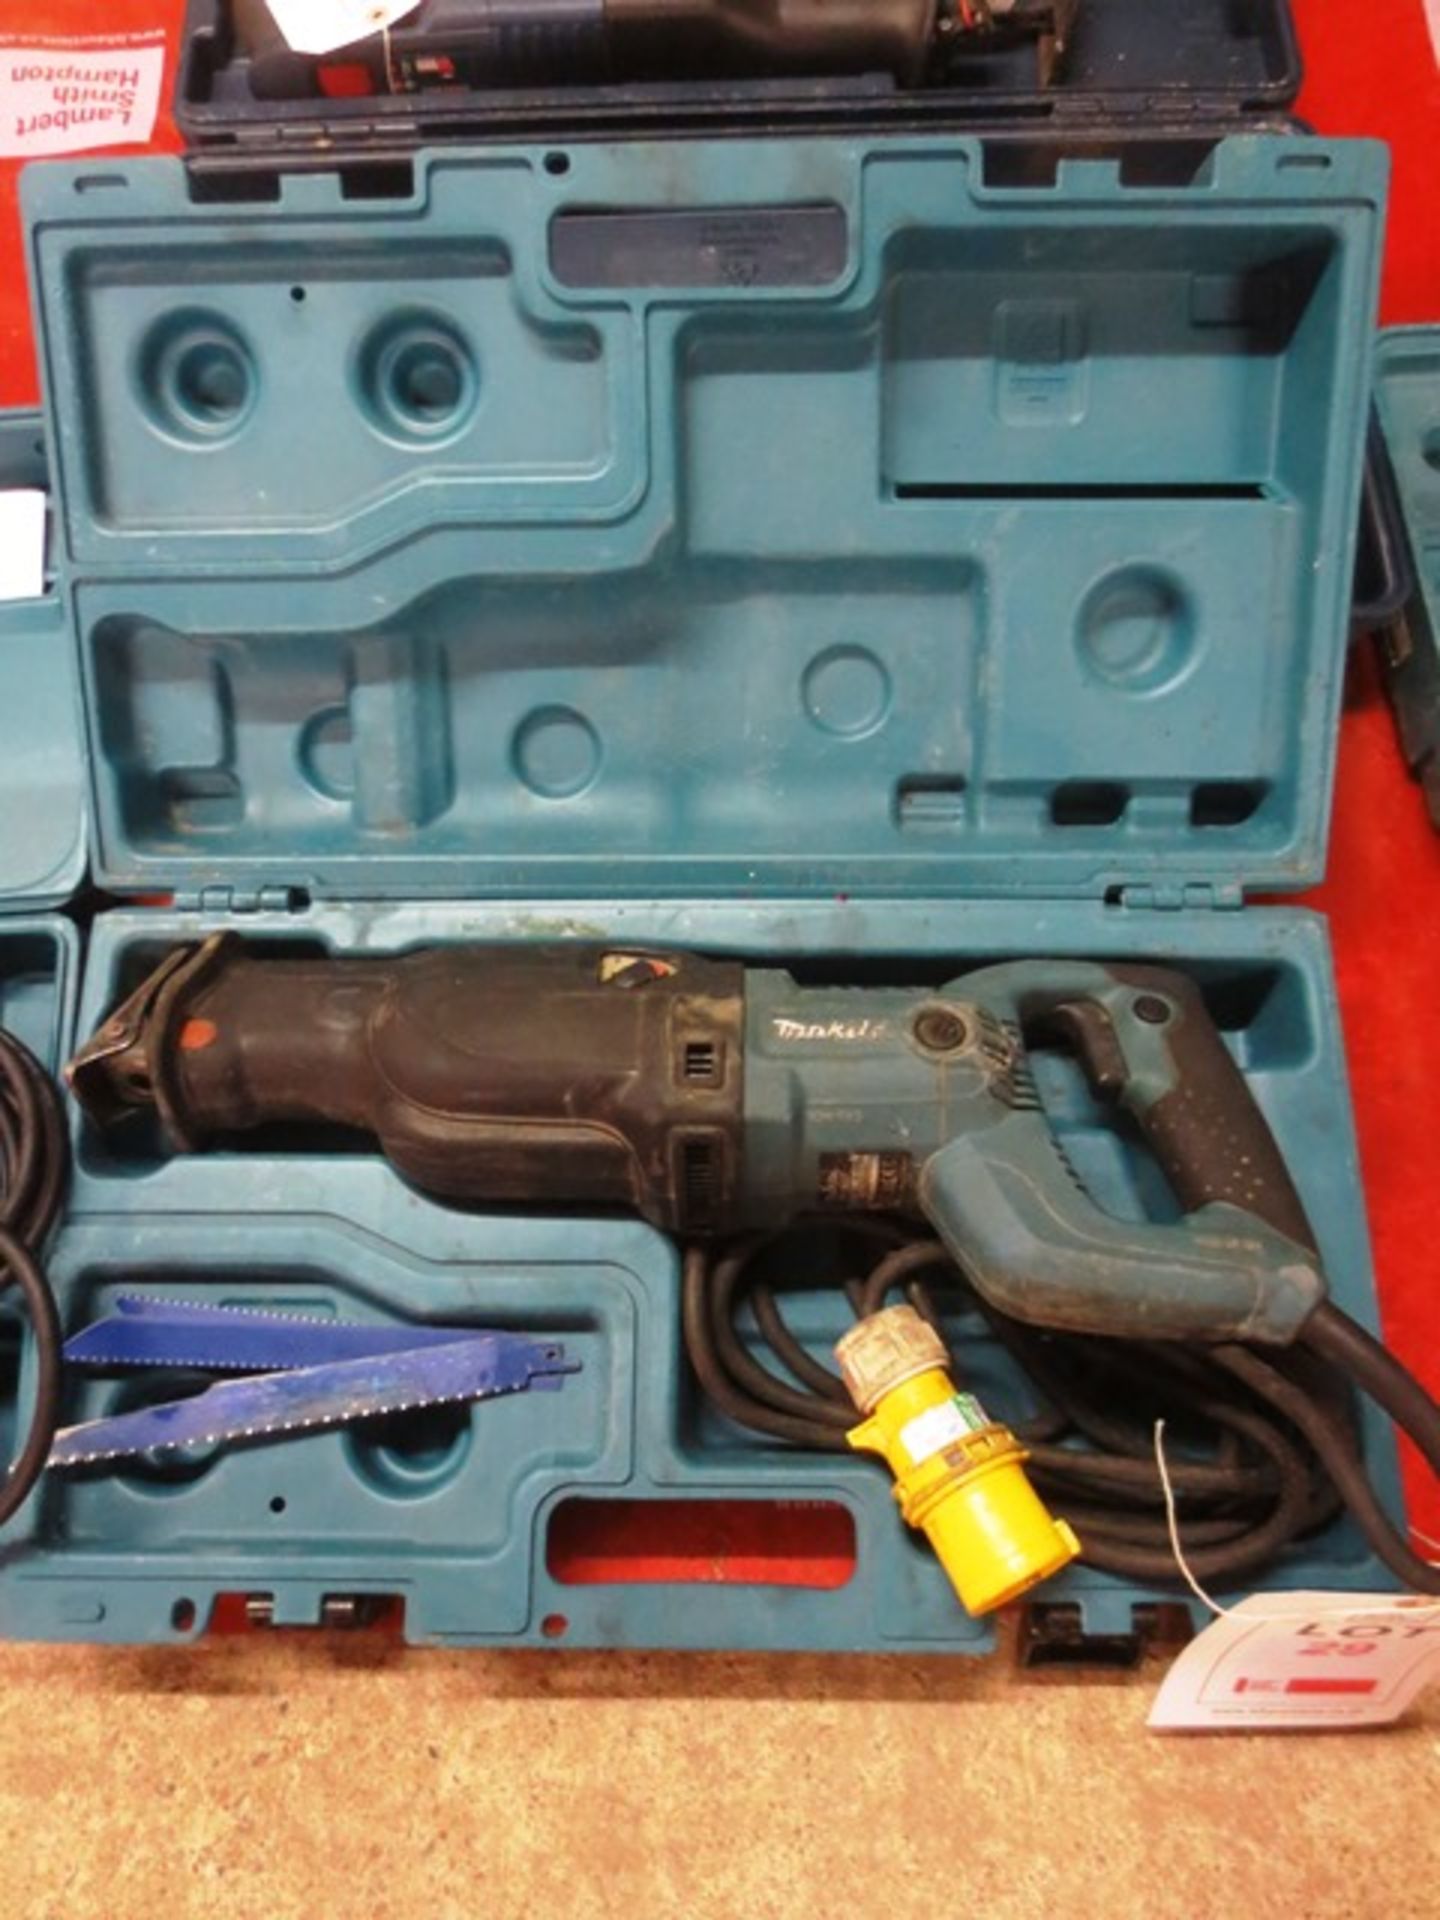 Makita JR3060T 110v reciprocating saw with carry case